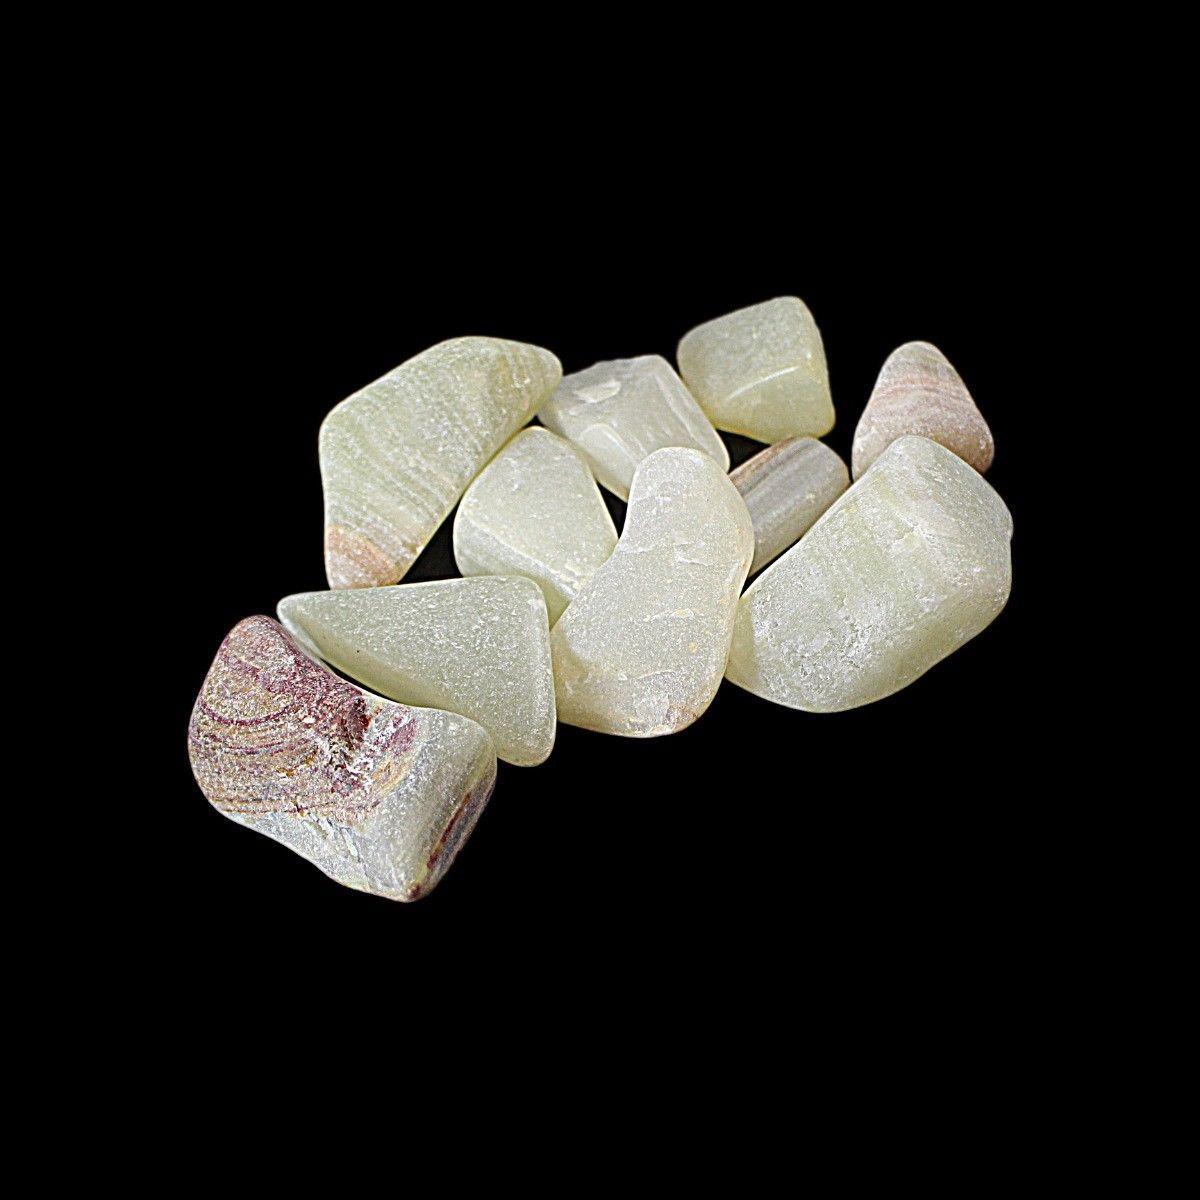 Pack Of Fish Tank Stones Decor Ideal For Aquariums 4486 (Large Letter Rate)